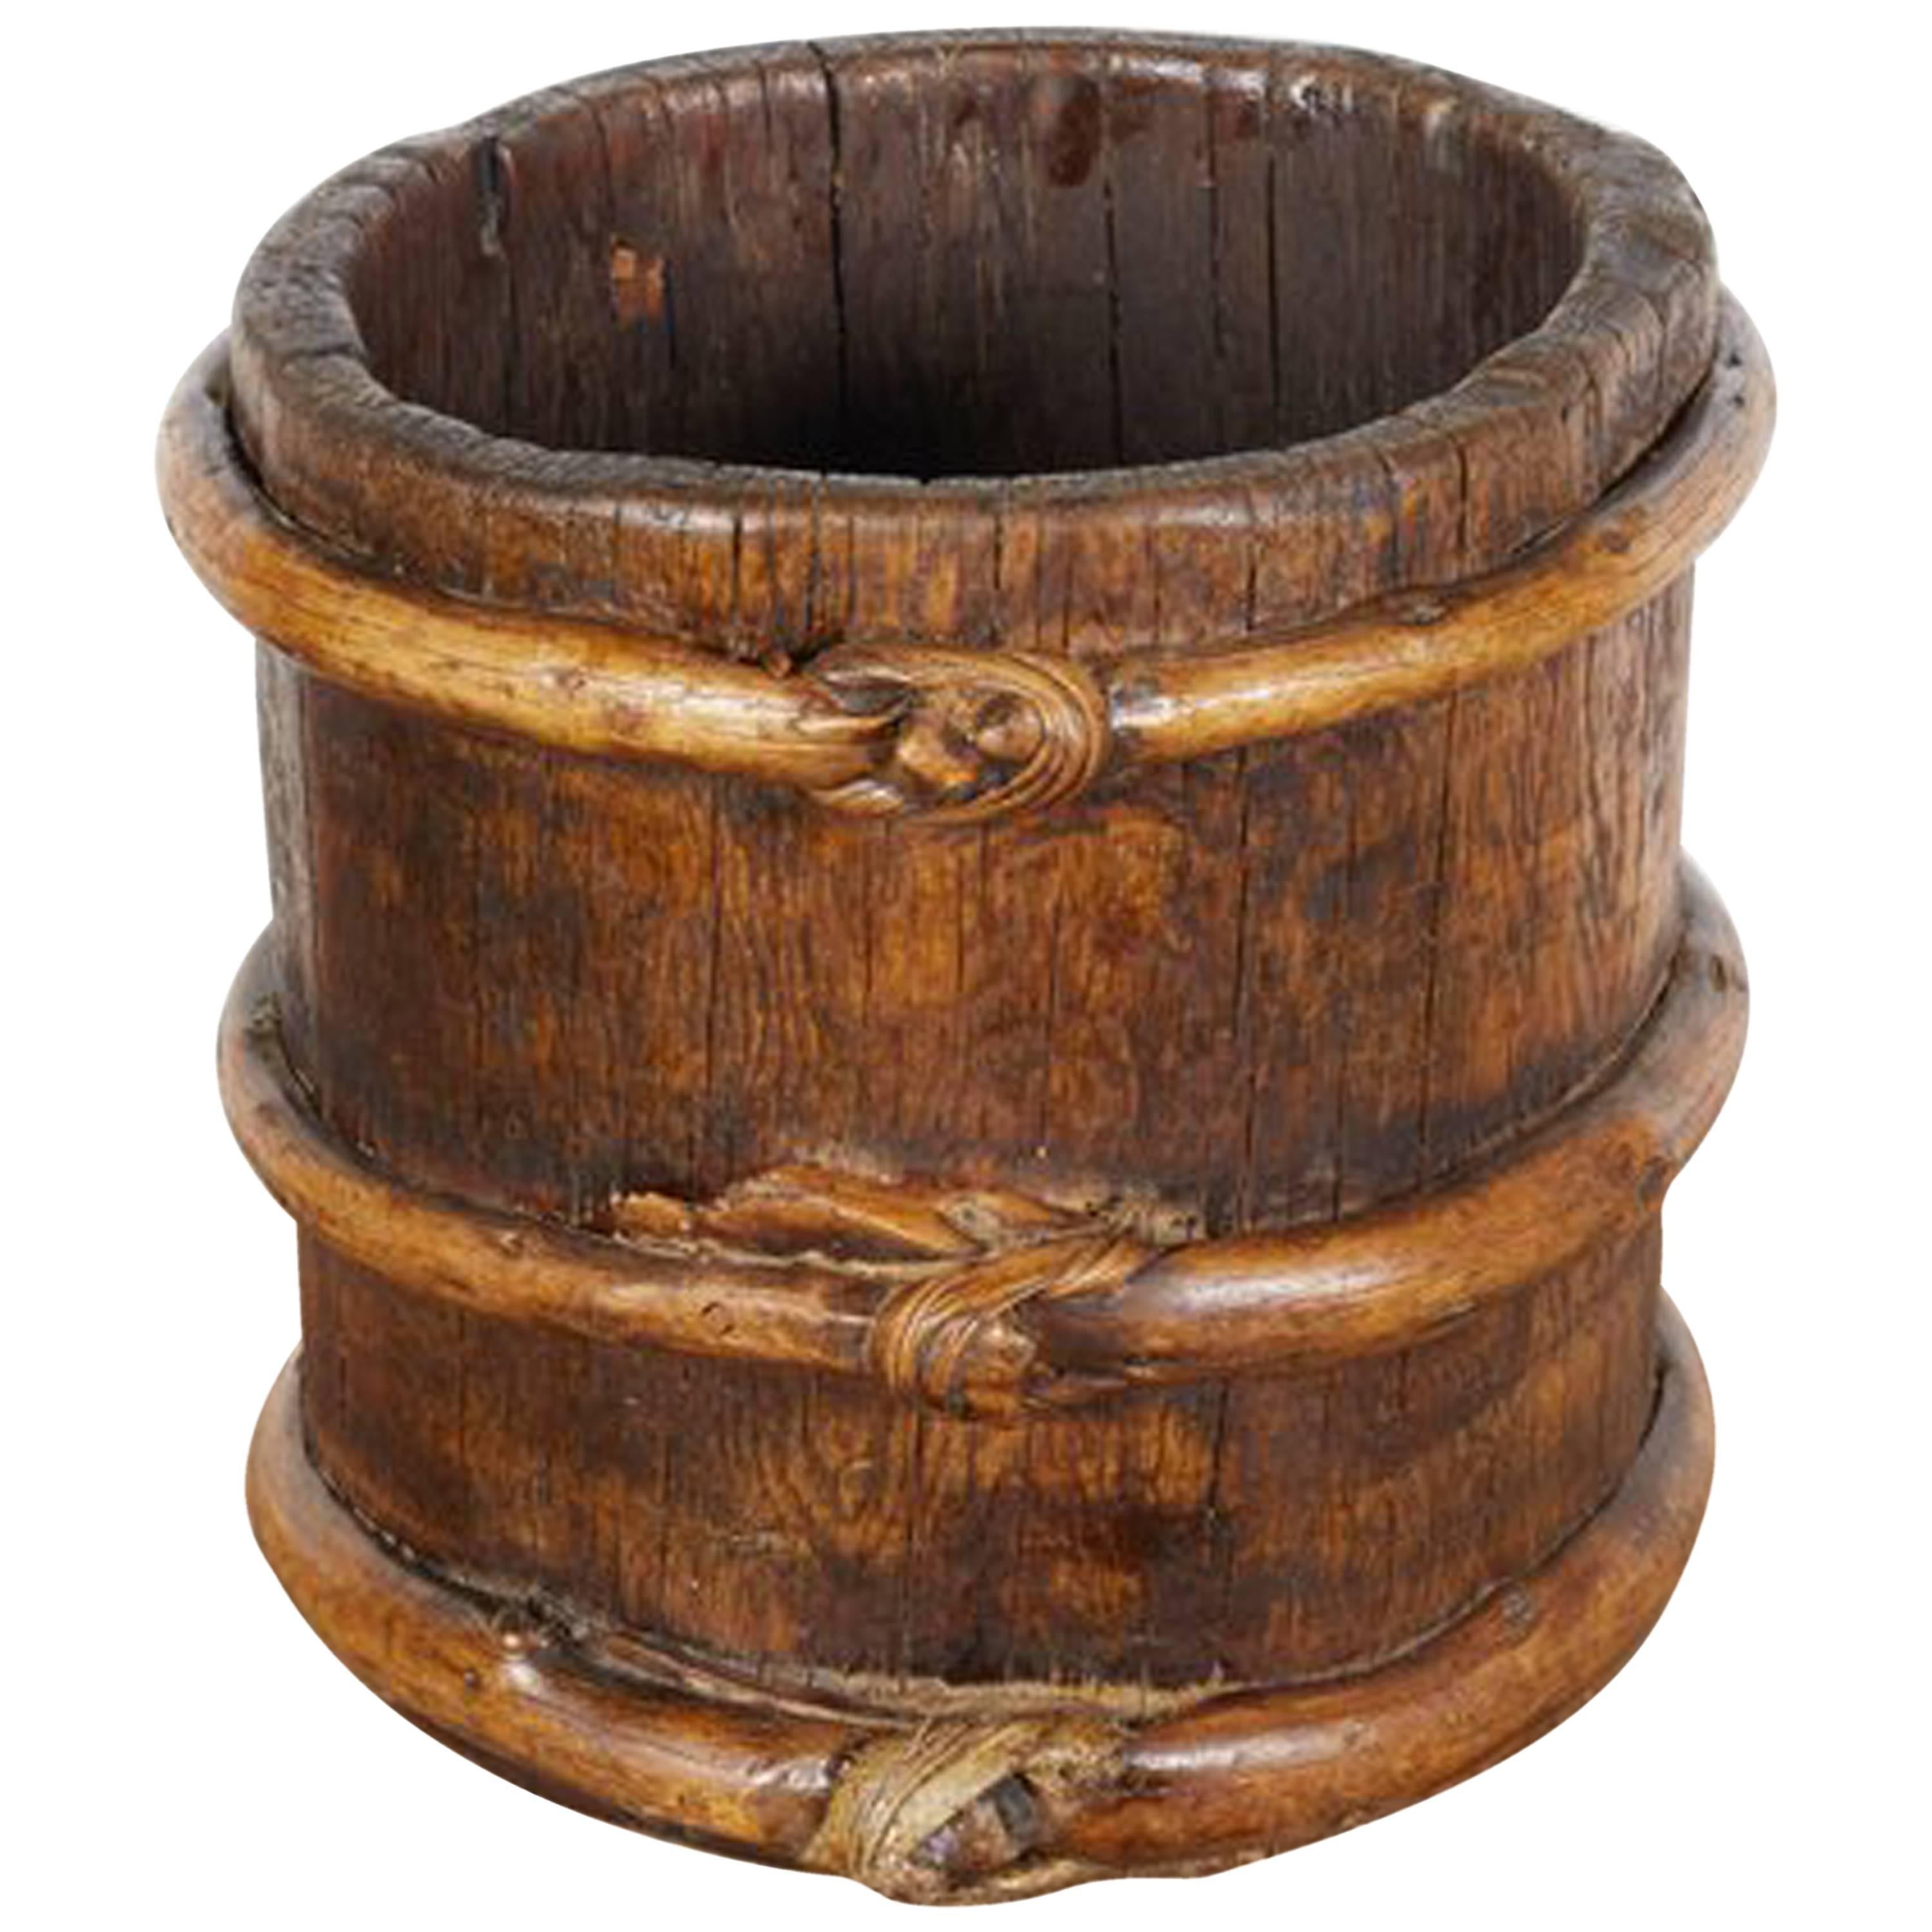 Antique Tibetan Yak Butter Churn with Decorative Knots For Sale